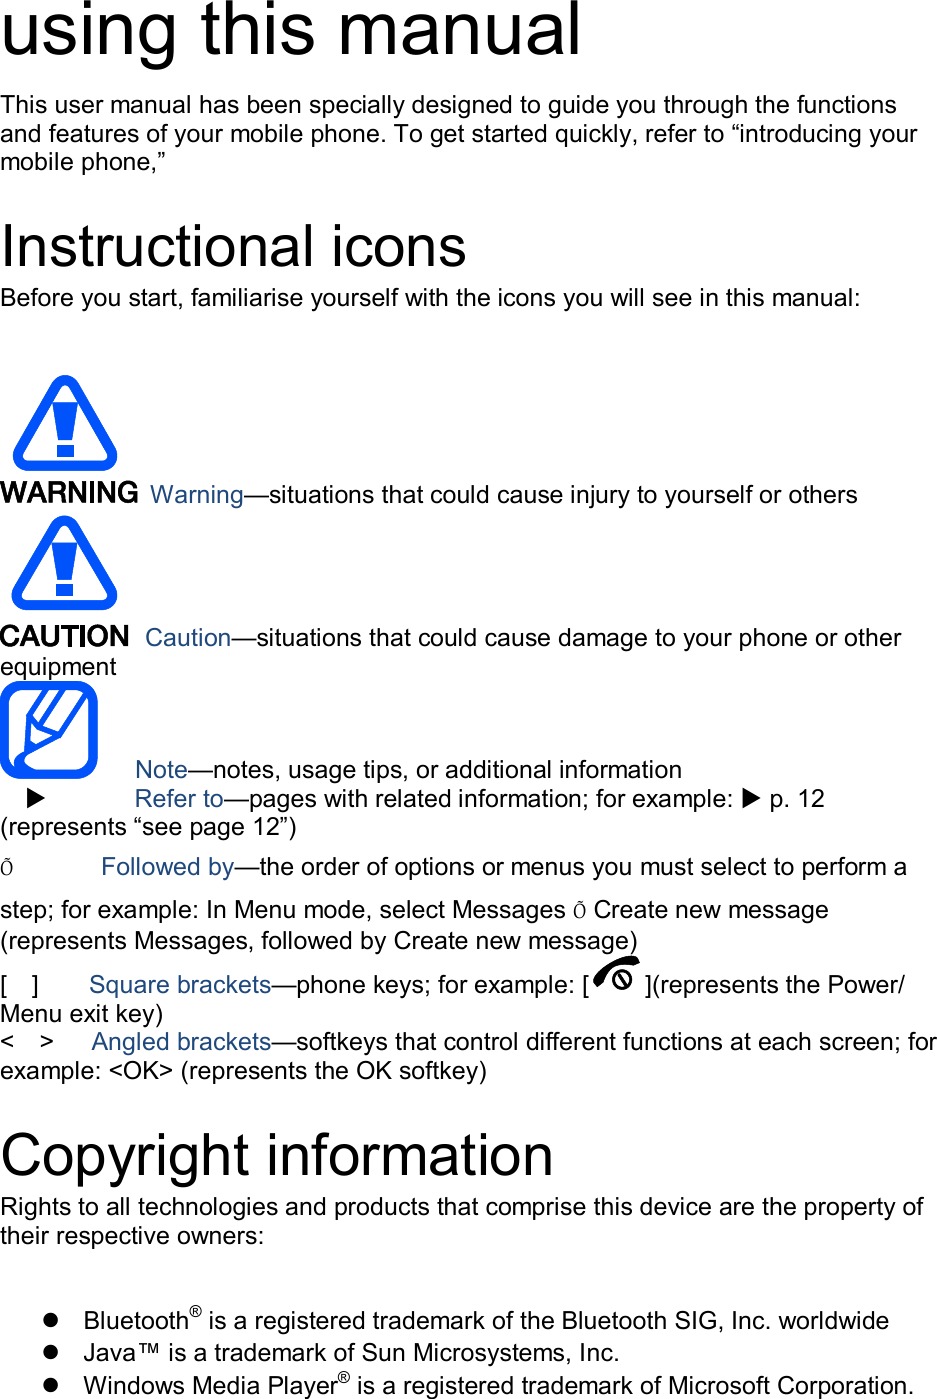 using this manual This user manual has been specially designed to guide you through the functions and features of your mobile phone. To get started quickly, refer to “introducing your mobile phone,”    Instructional icons Before you start, familiarise yourself with the icons you will see in this manual:     Warning—situations that could cause injury to yourself or others  Caution—situations that could cause damage to your phone or other equipment    Note—notes, usage tips, or additional information          Refer to—pages with related information; for example:  p. 12 (represents “see page 12”) Õ         Followed by—the order of options or menus you must select to perform a step; for example: In Menu mode, select Messages Õ Create new message (represents Messages, followed by Create new message) [    ]        Square brackets—phone keys; for example: [ ](represents the Power/ Menu exit key) &lt;    &gt;    Angled brackets—softkeys that control different functions at each screen; for example: &lt;OK&gt; (represents the OK softkey)  Copyright information Rights to all technologies and products that comprise this device are the property of their respective owners:    Bluetooth® is a registered trademark of the Bluetooth SIG, Inc. worldwide   Java™ is a trademark of Sun Microsystems, Inc.   Windows Media Player® is a registered trademark of Microsoft Corporation. 